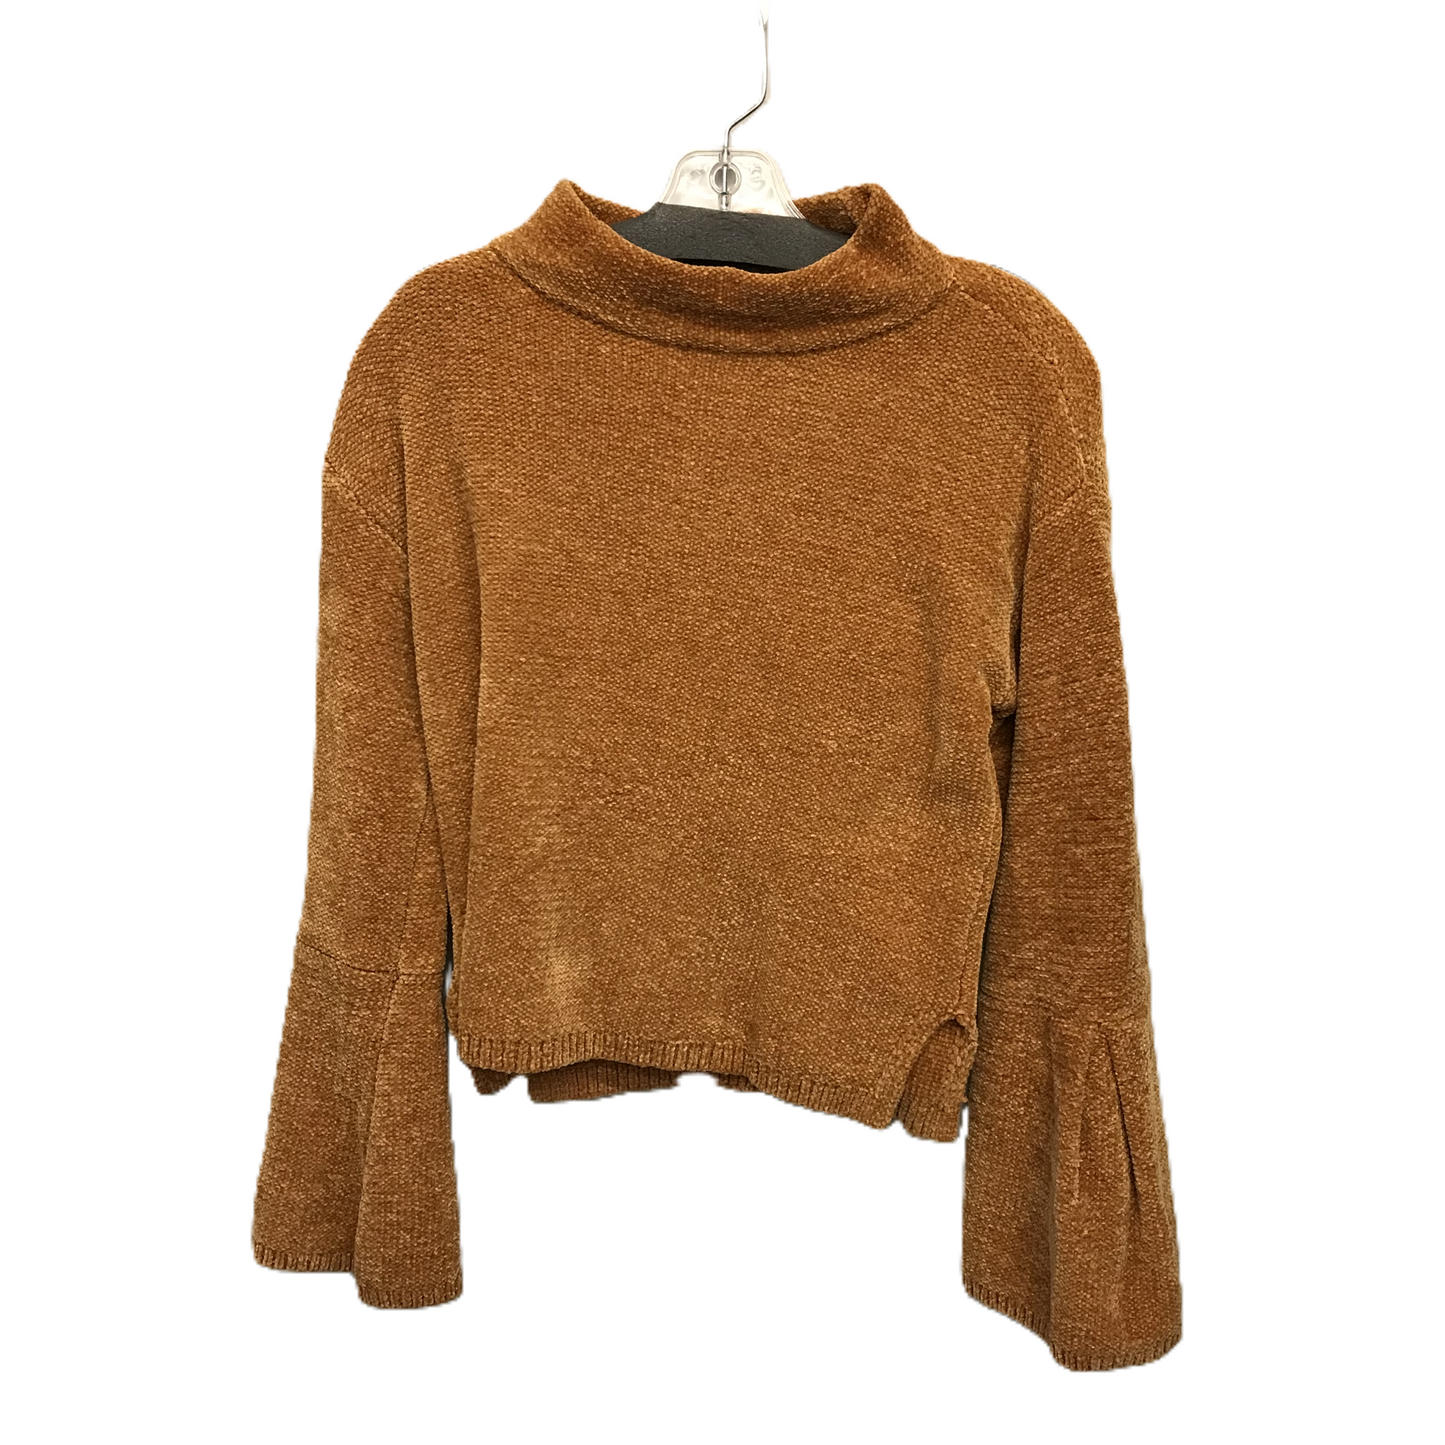 Sweater By Melrose And Market  Size: Xs